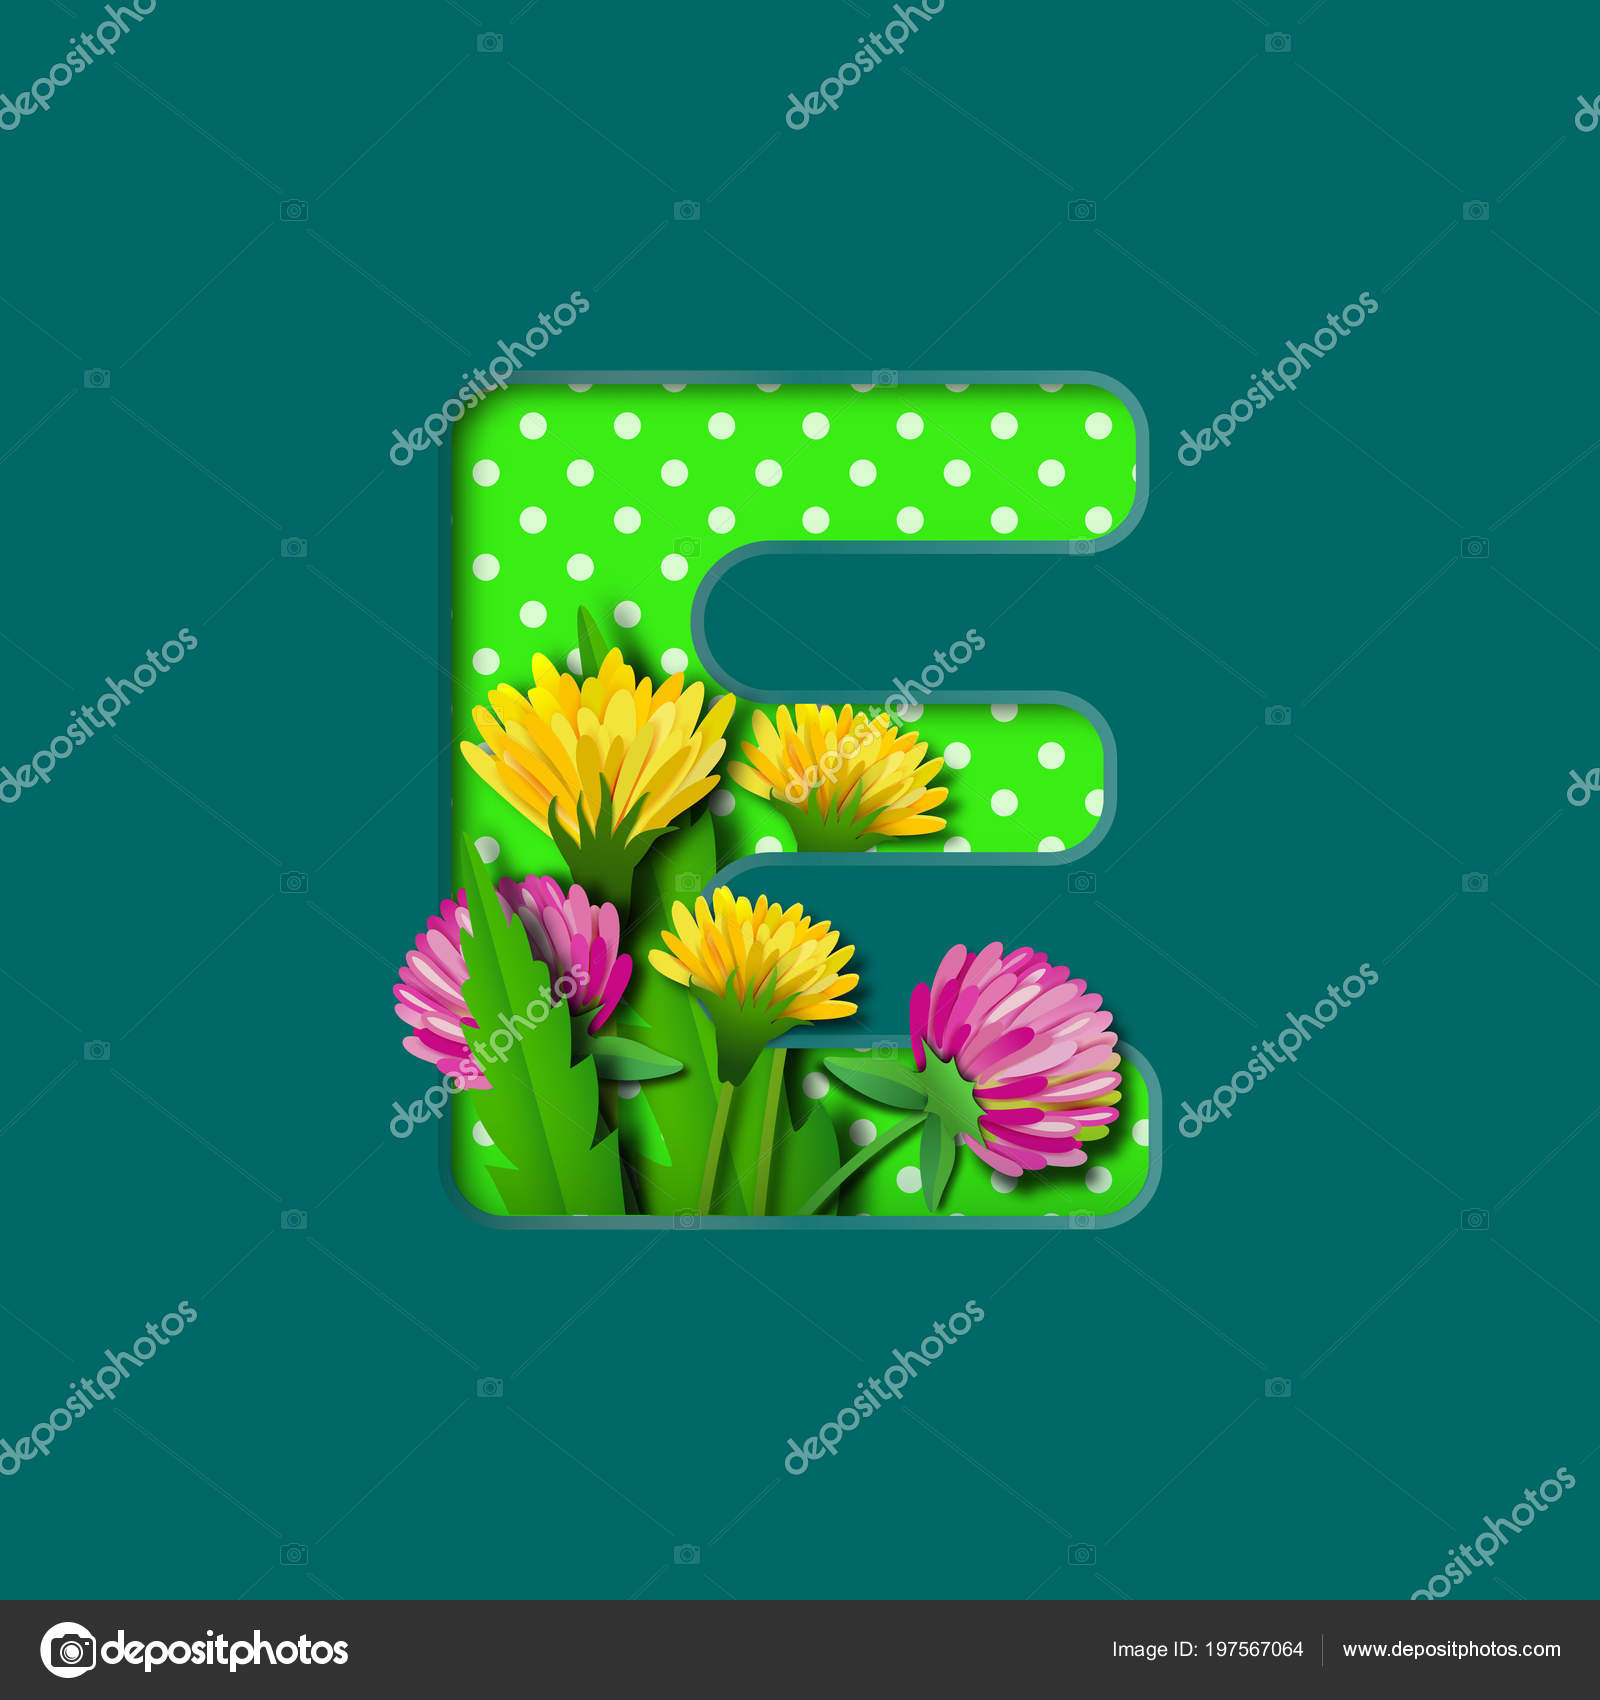 Origami Letter E Letter E With Paper Summer Wildflowers Dandelions And Clover Style